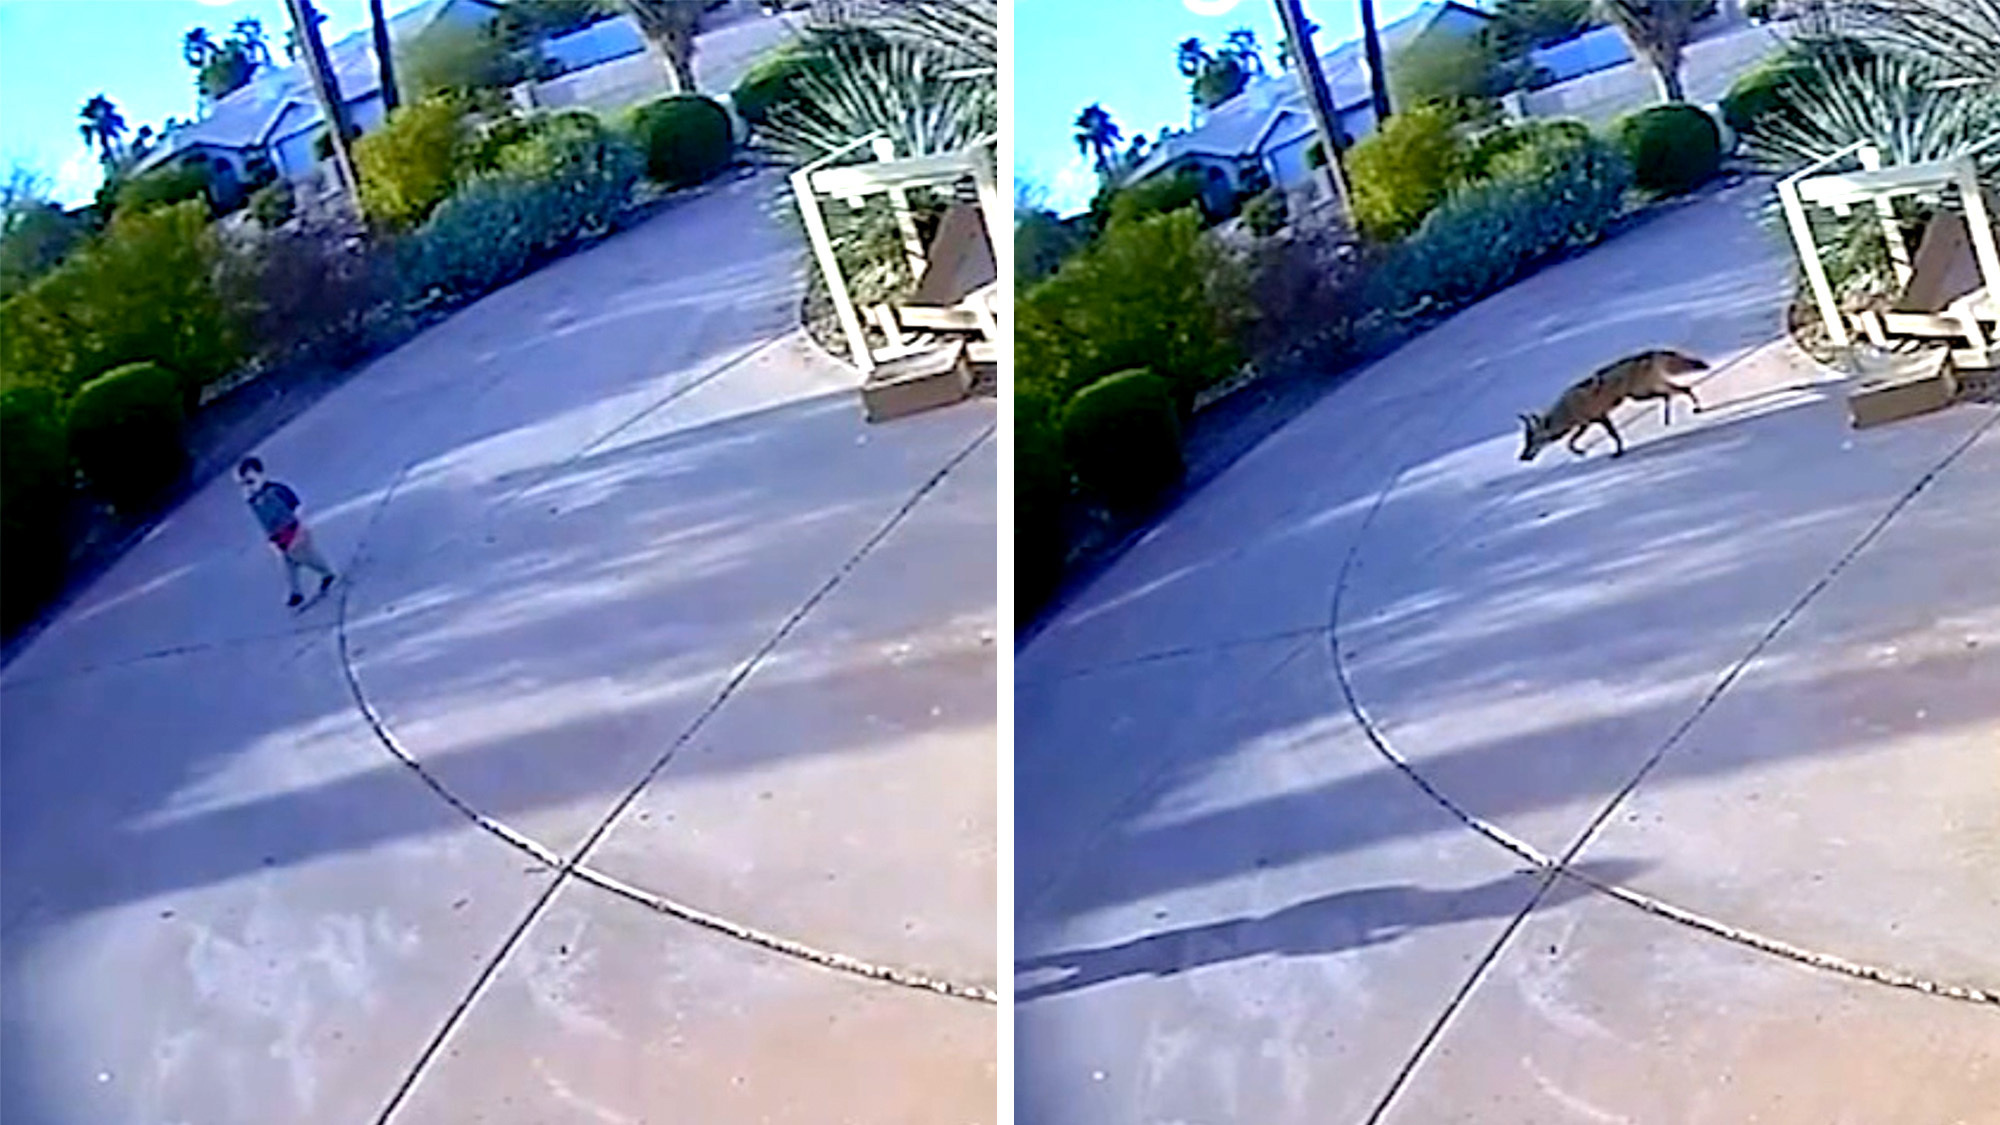 Coyote attacks toddler in a driveway.